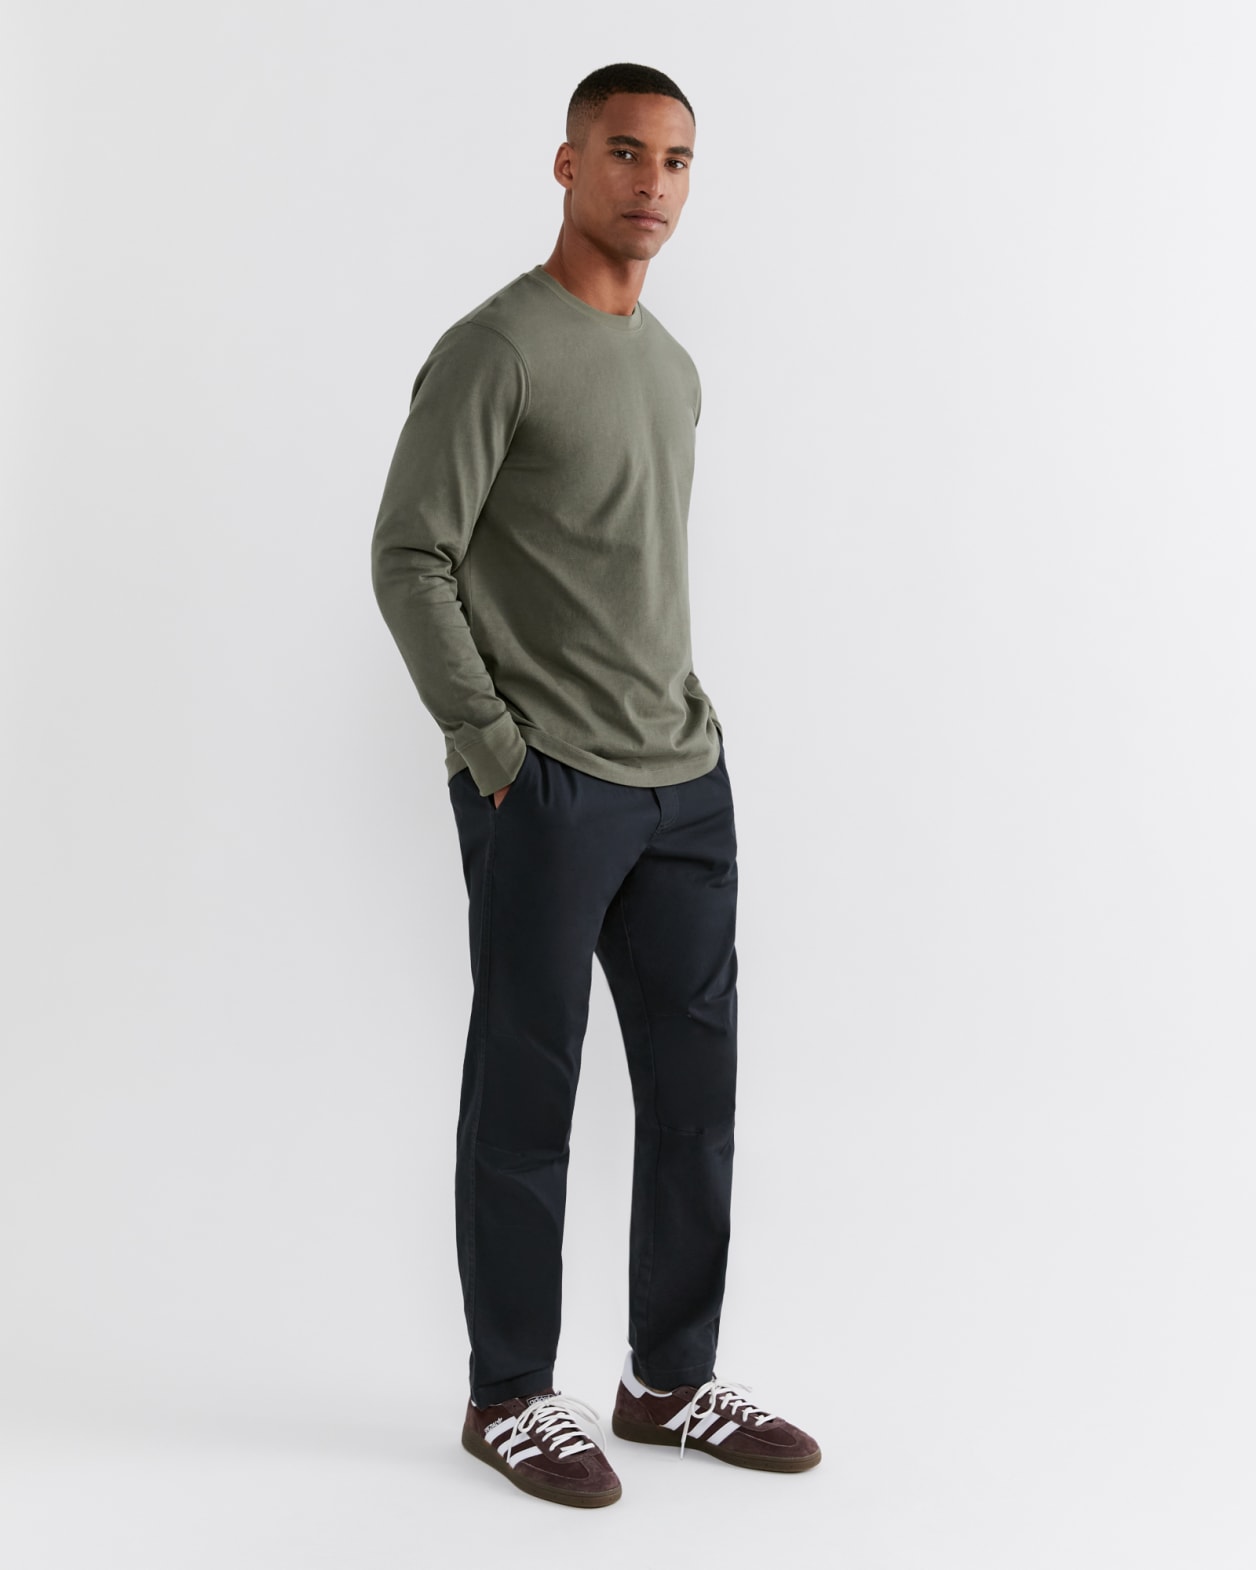 Knox Recycled Cotton Crew in MILITARY